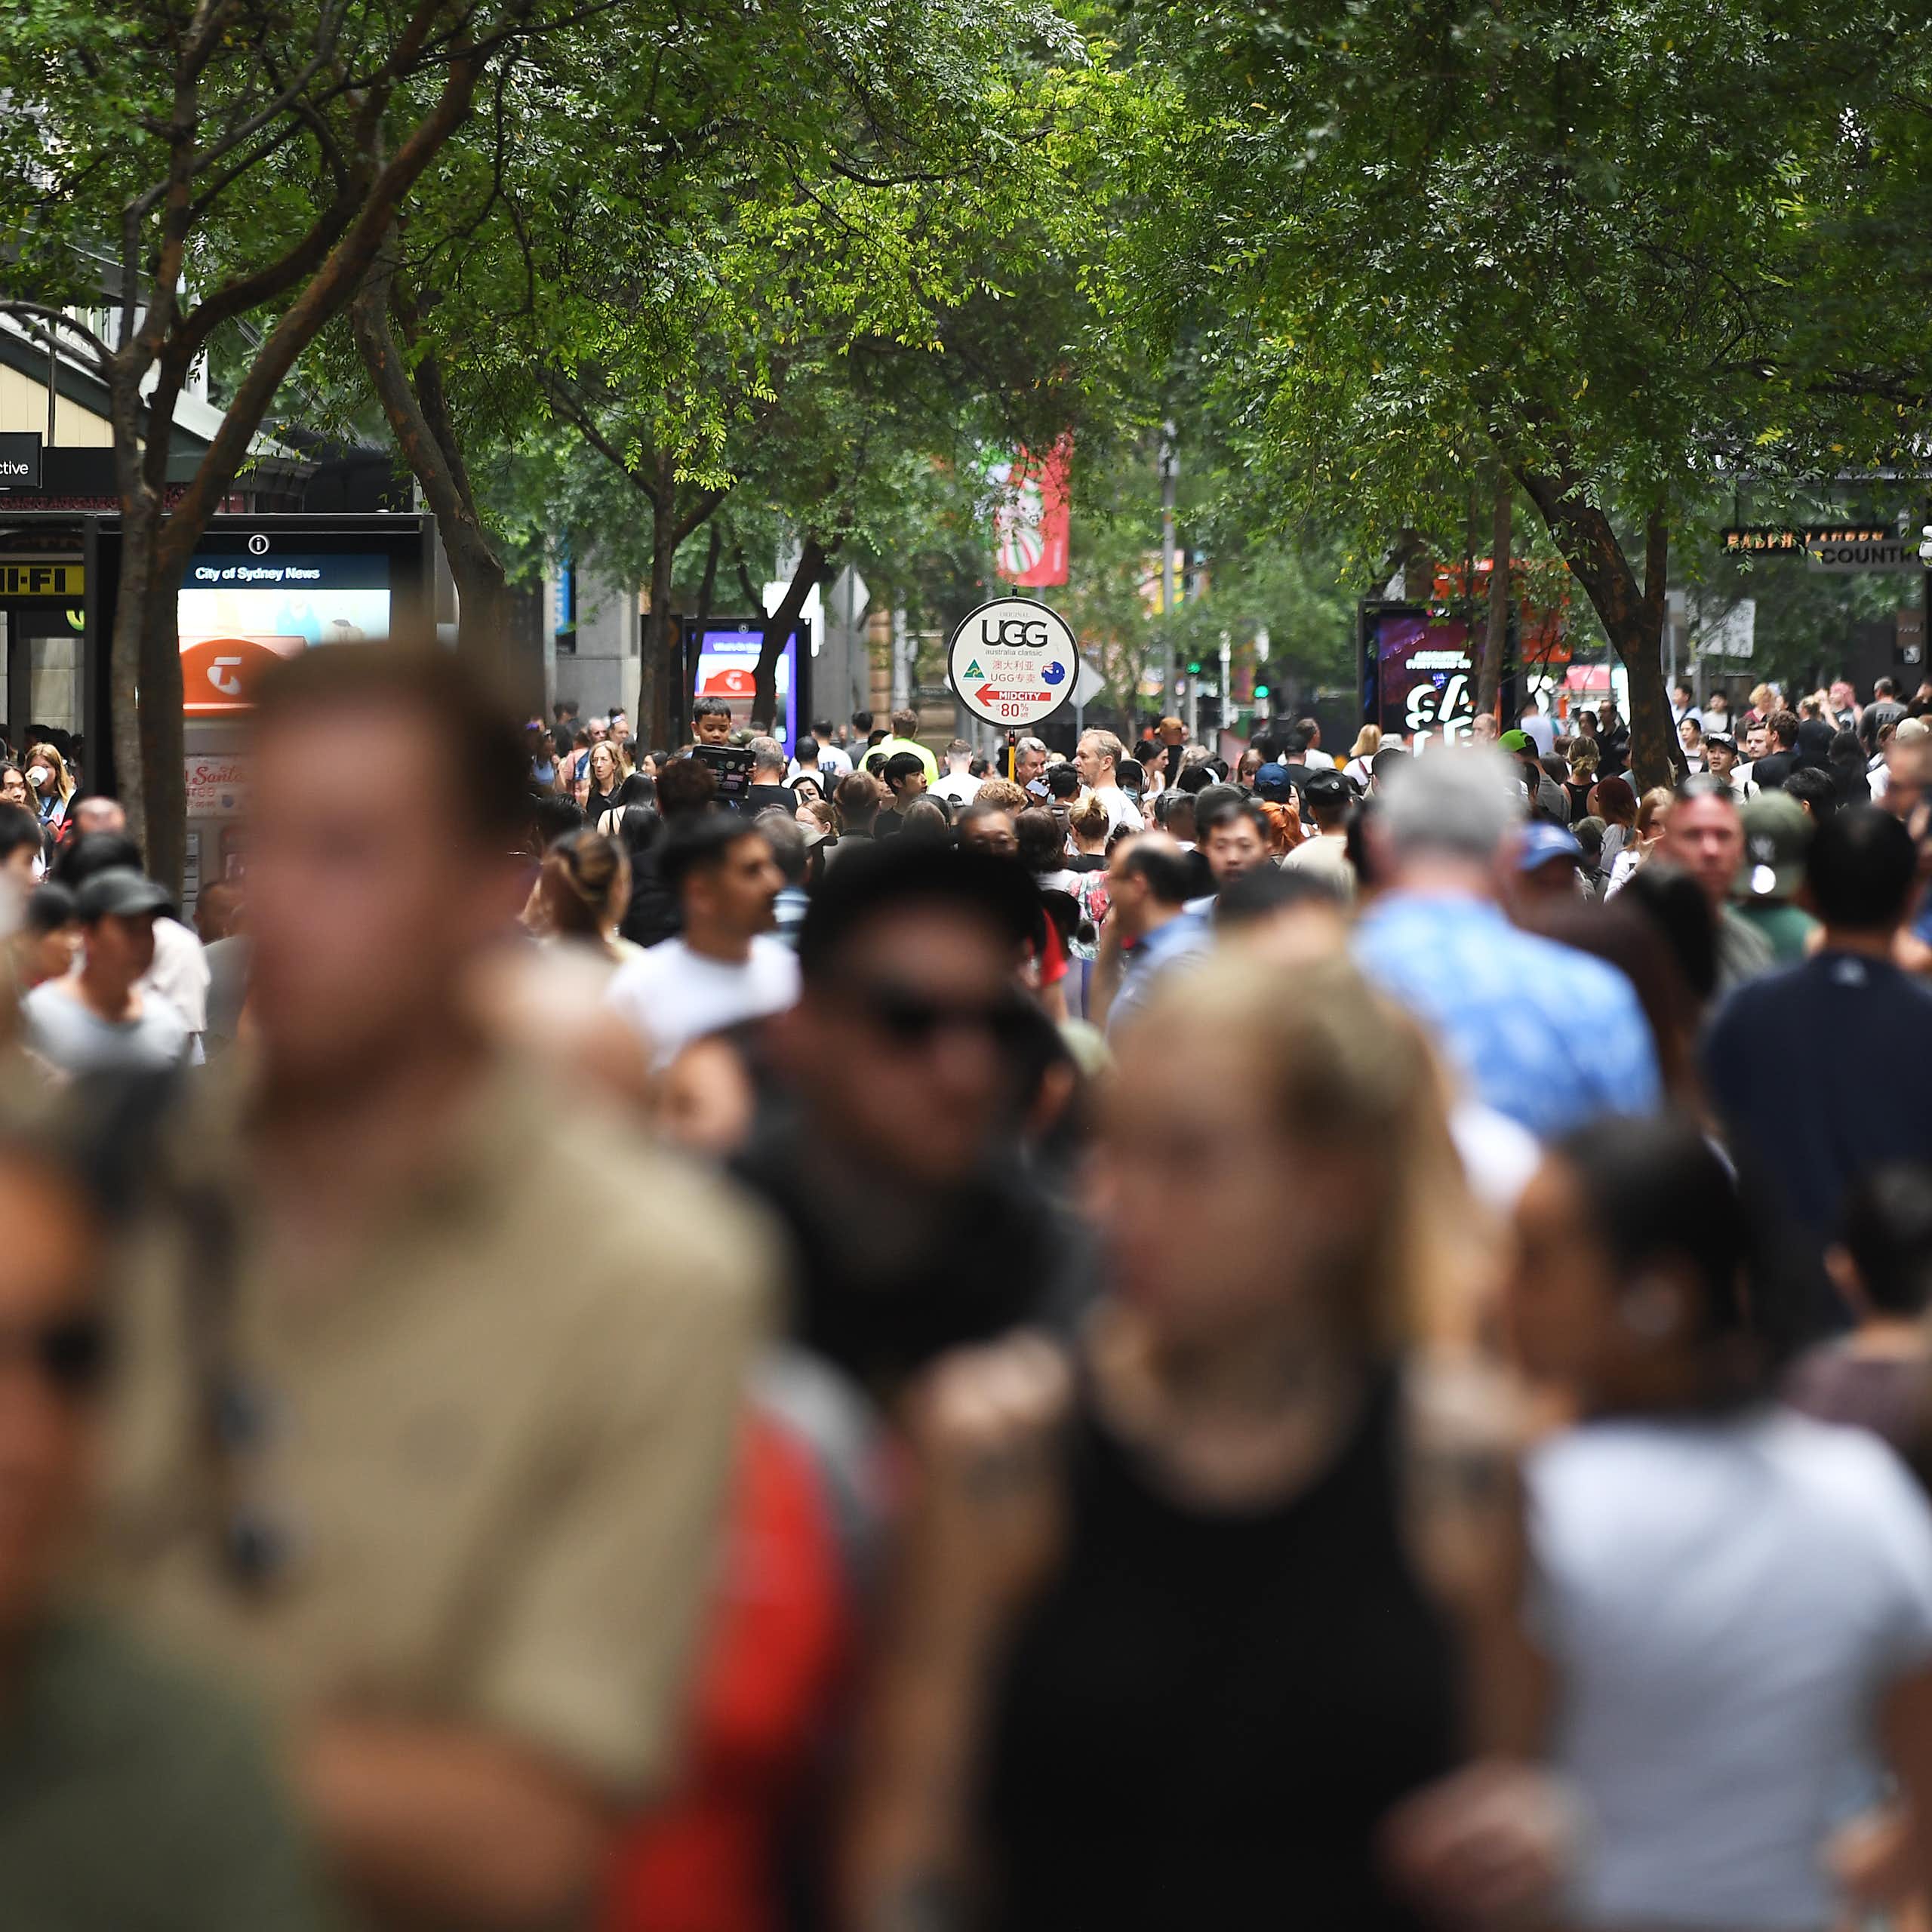 A blurry crowd of diverse people on a busy street